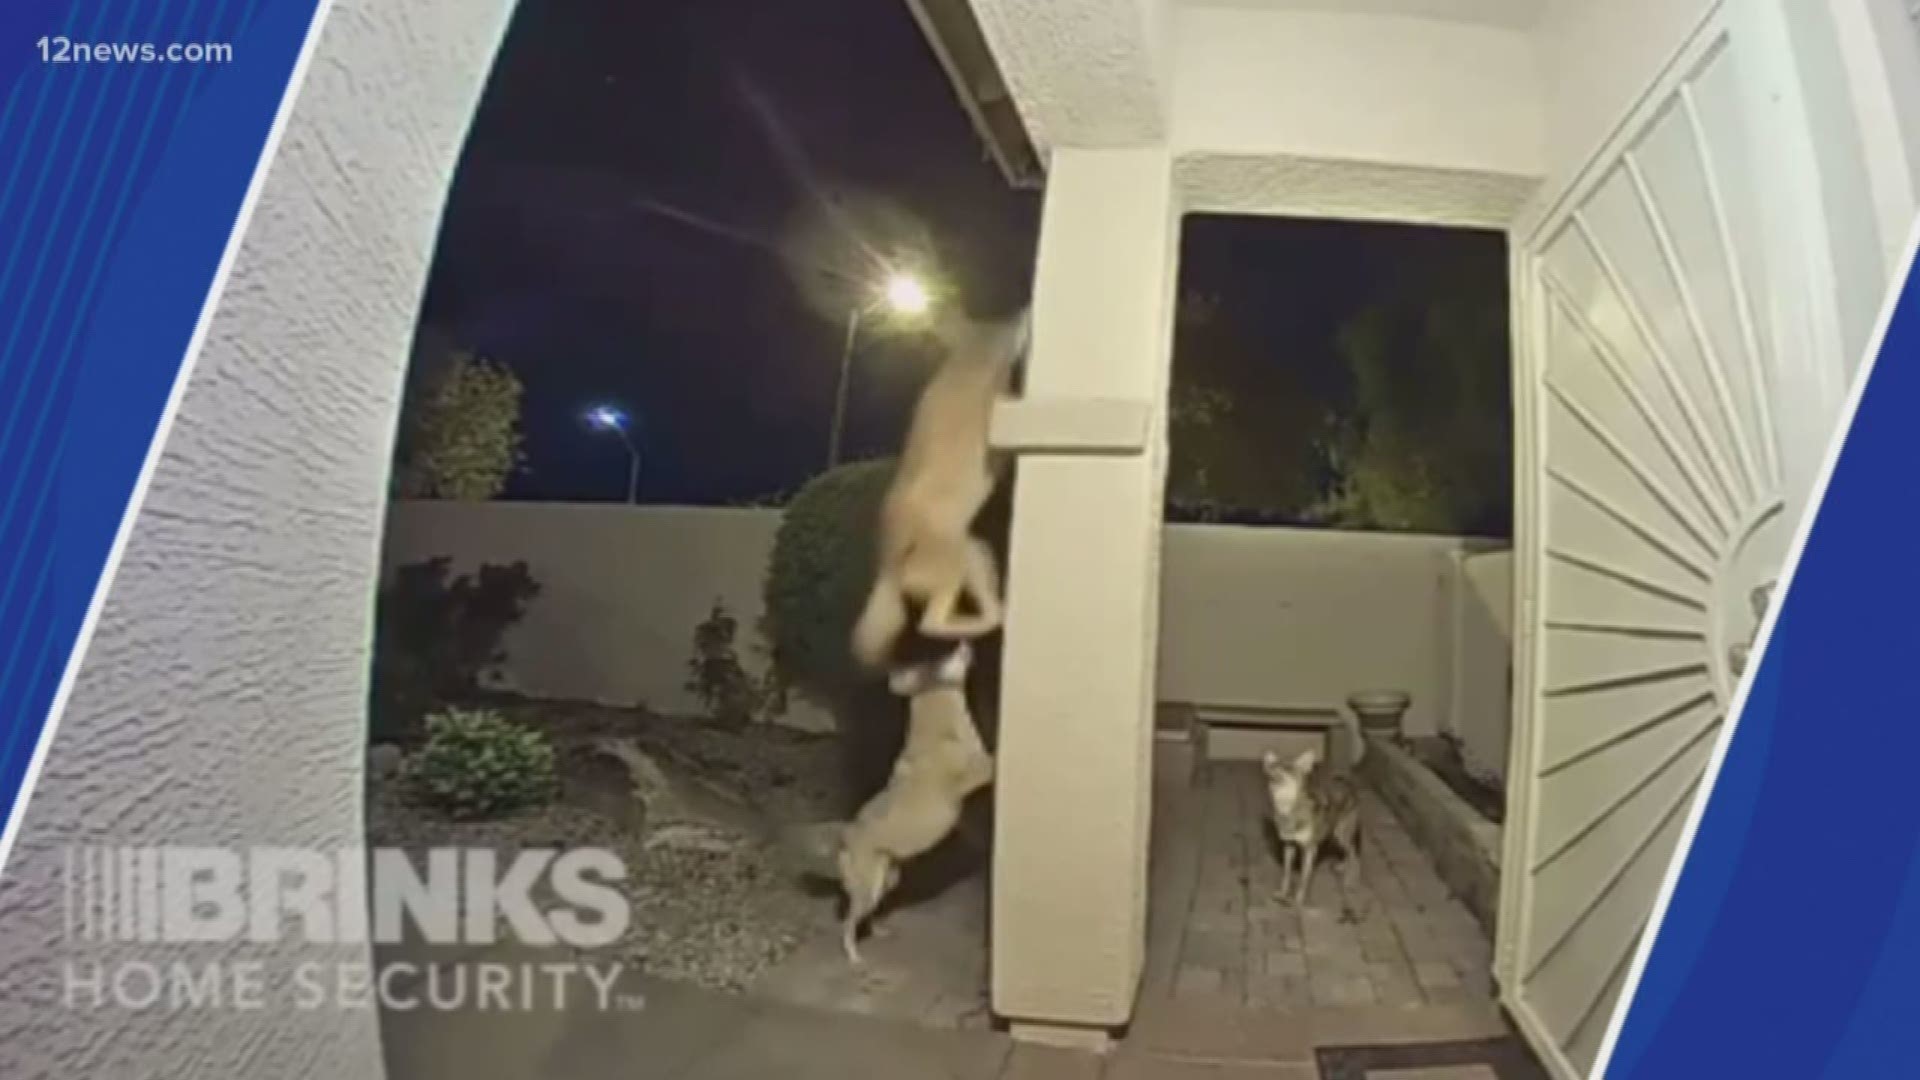 The video is tough to watch, but it serves as a reminder to protect your pets.